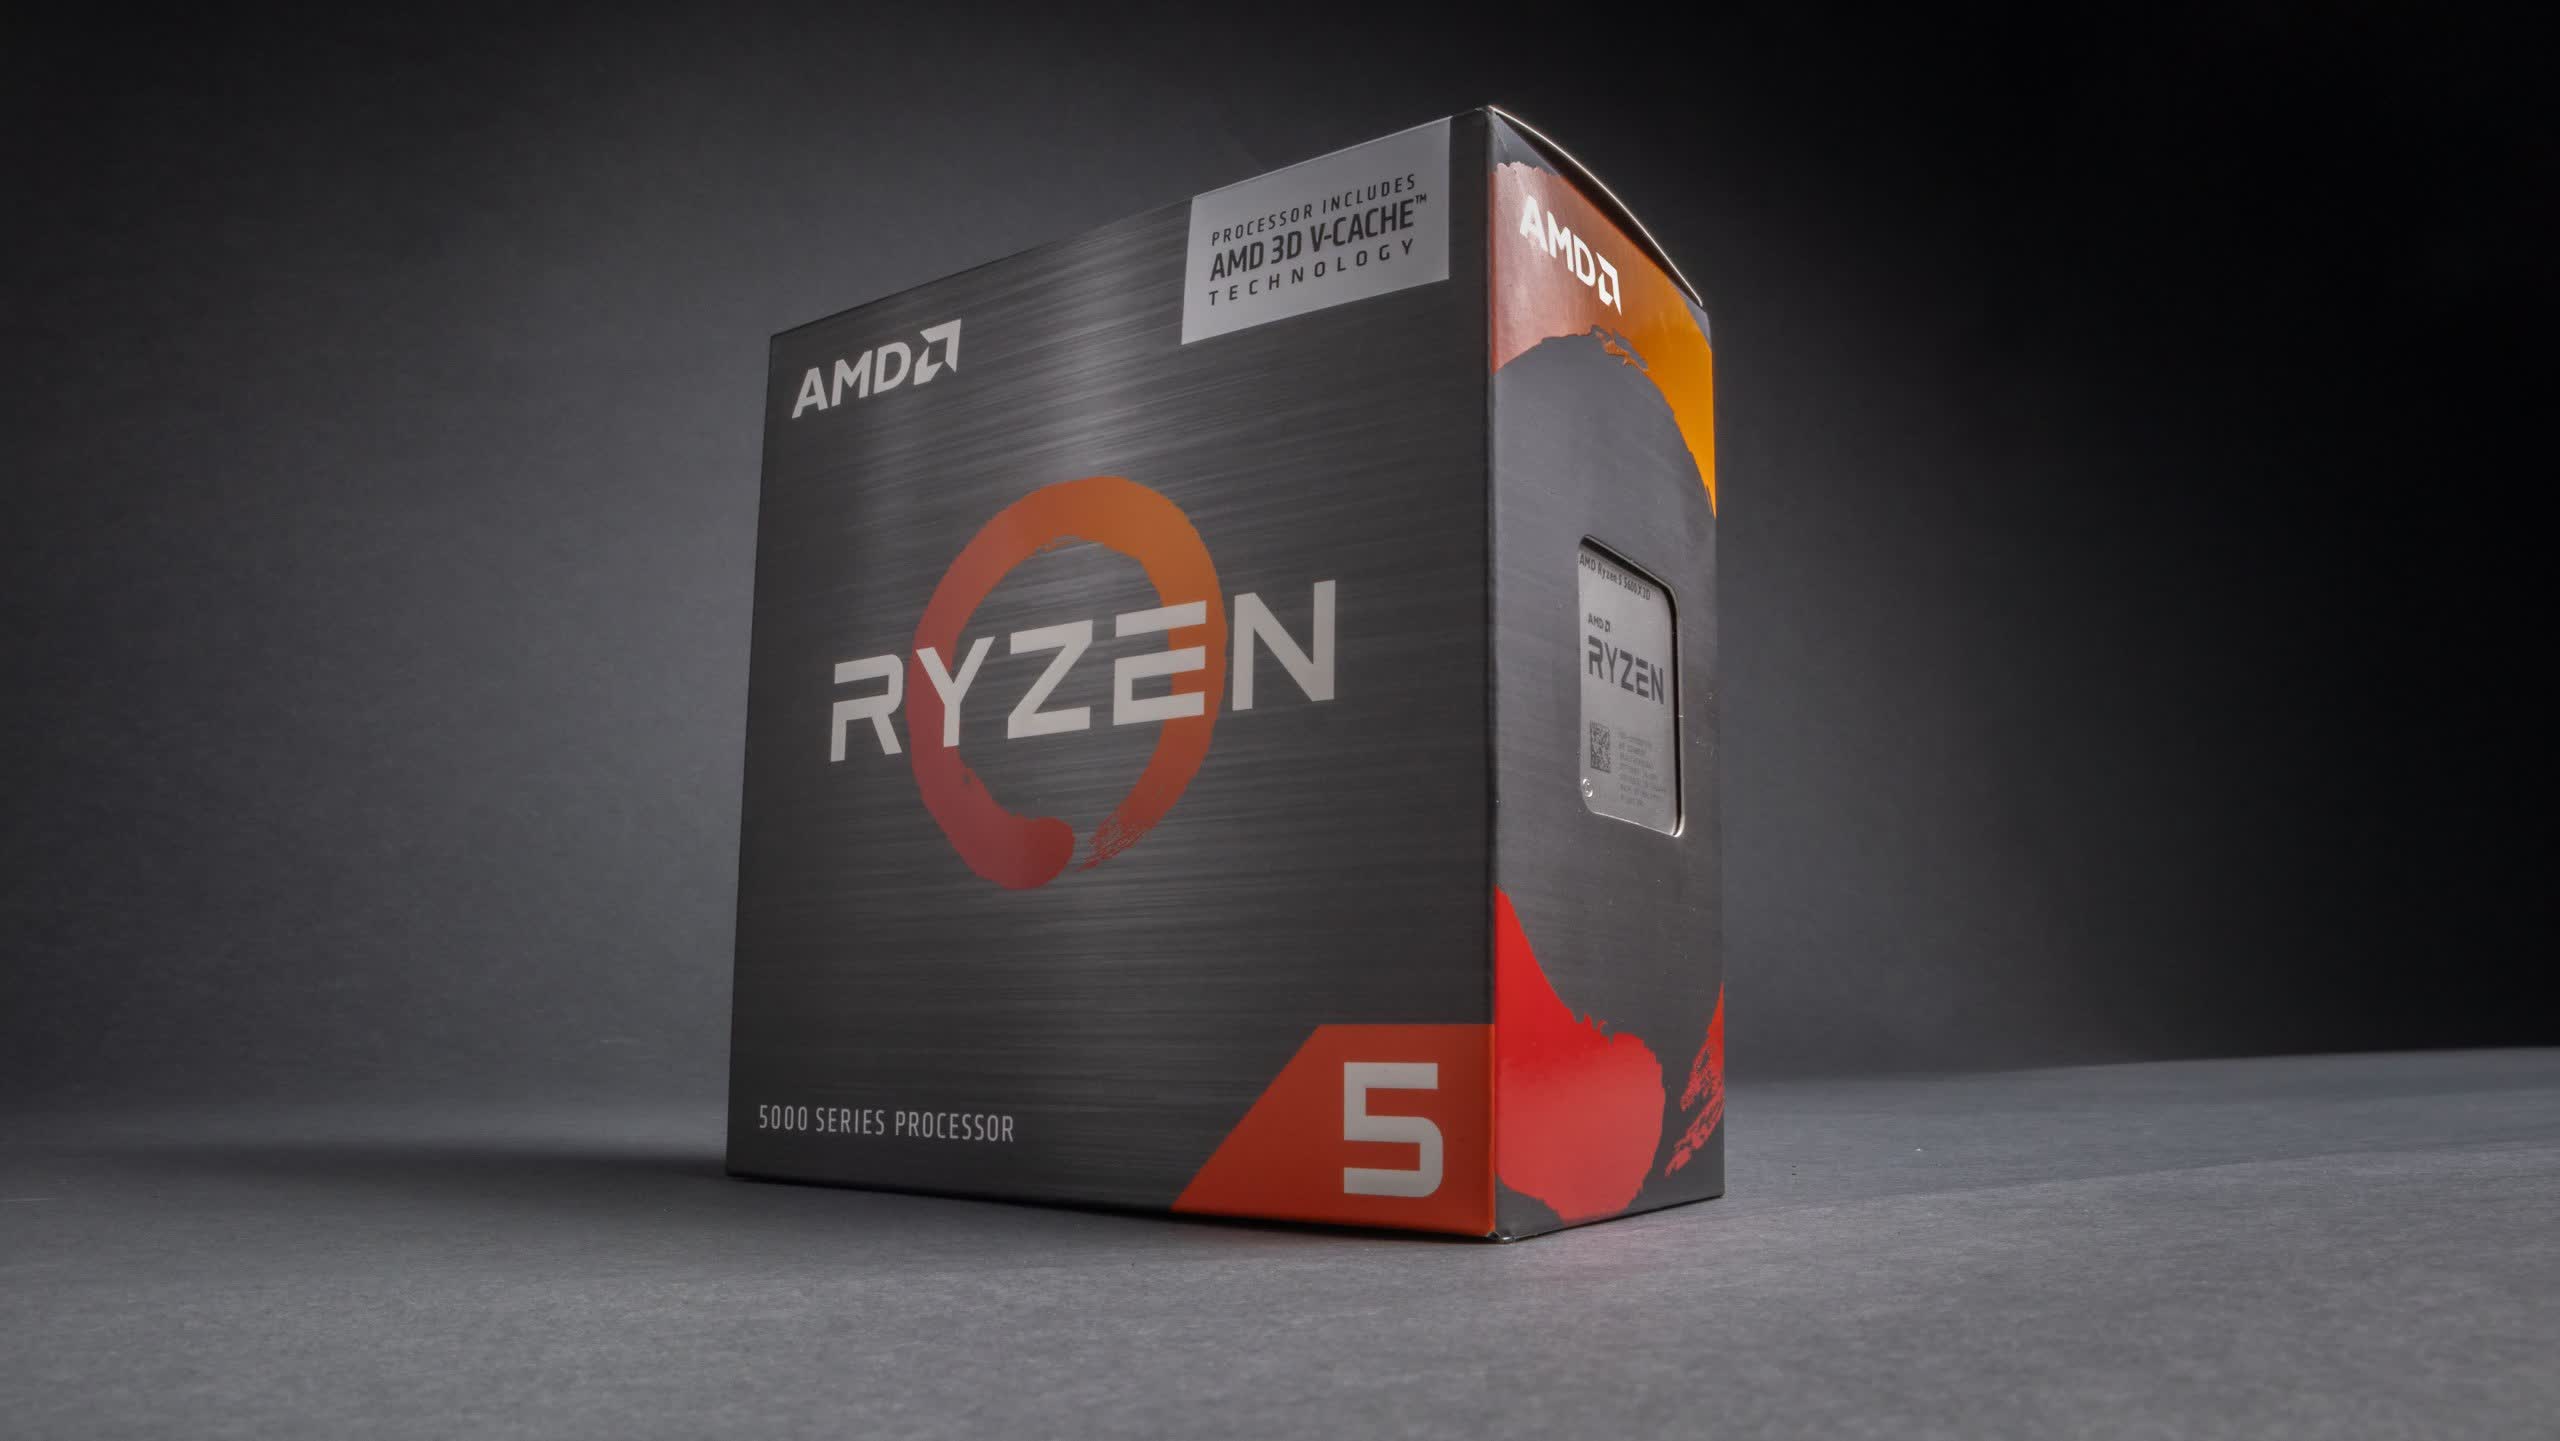 The Ryzen 5600X3D is real, but only while supplies last